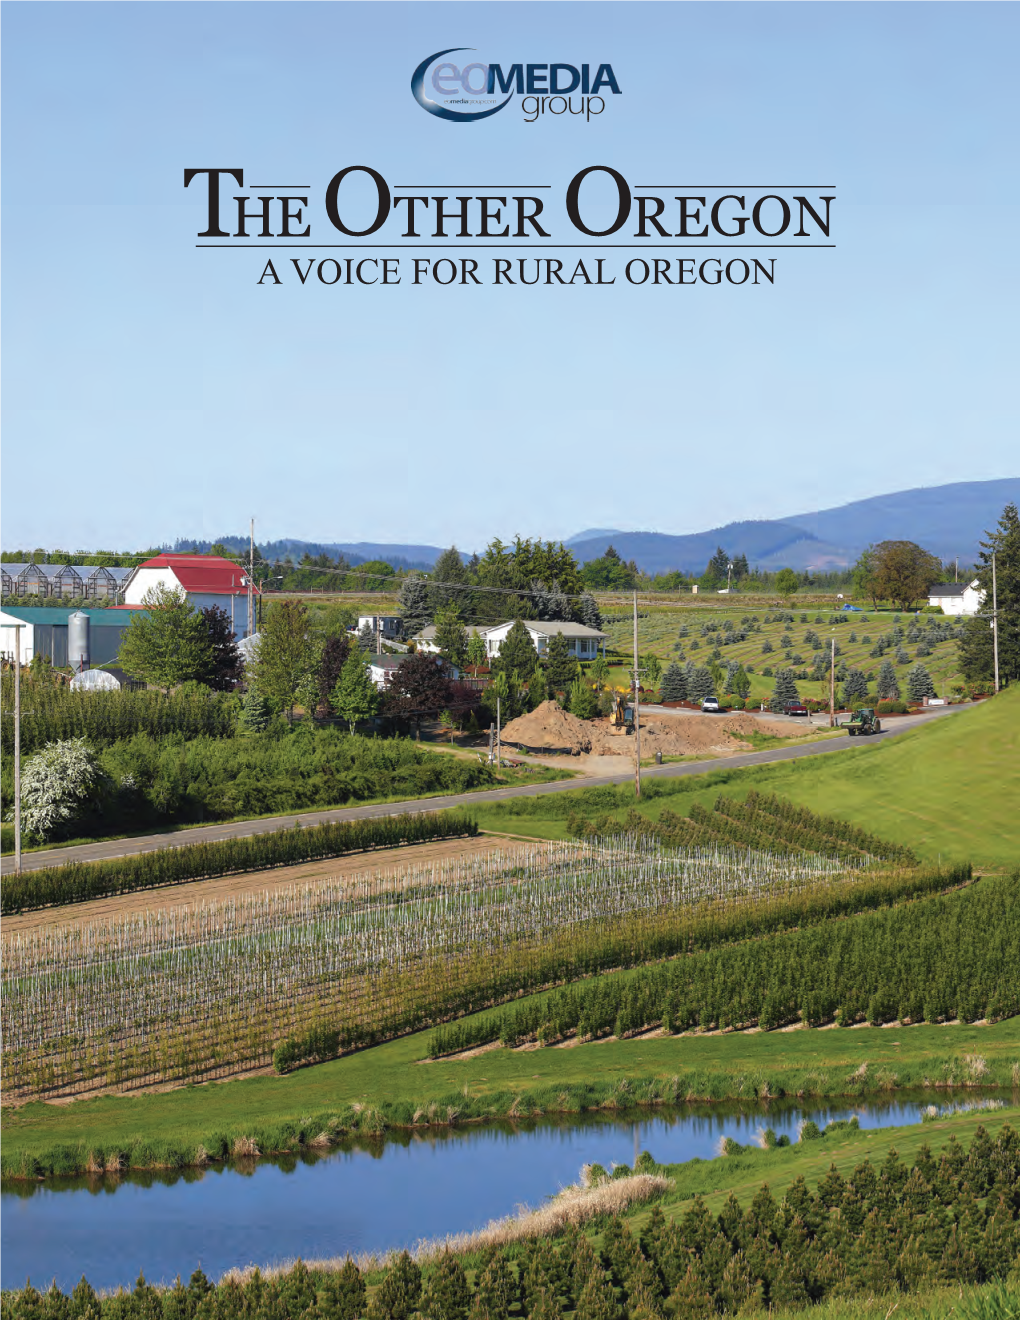 A VOICE for RURAL OREGON Introducing the Other Oregon